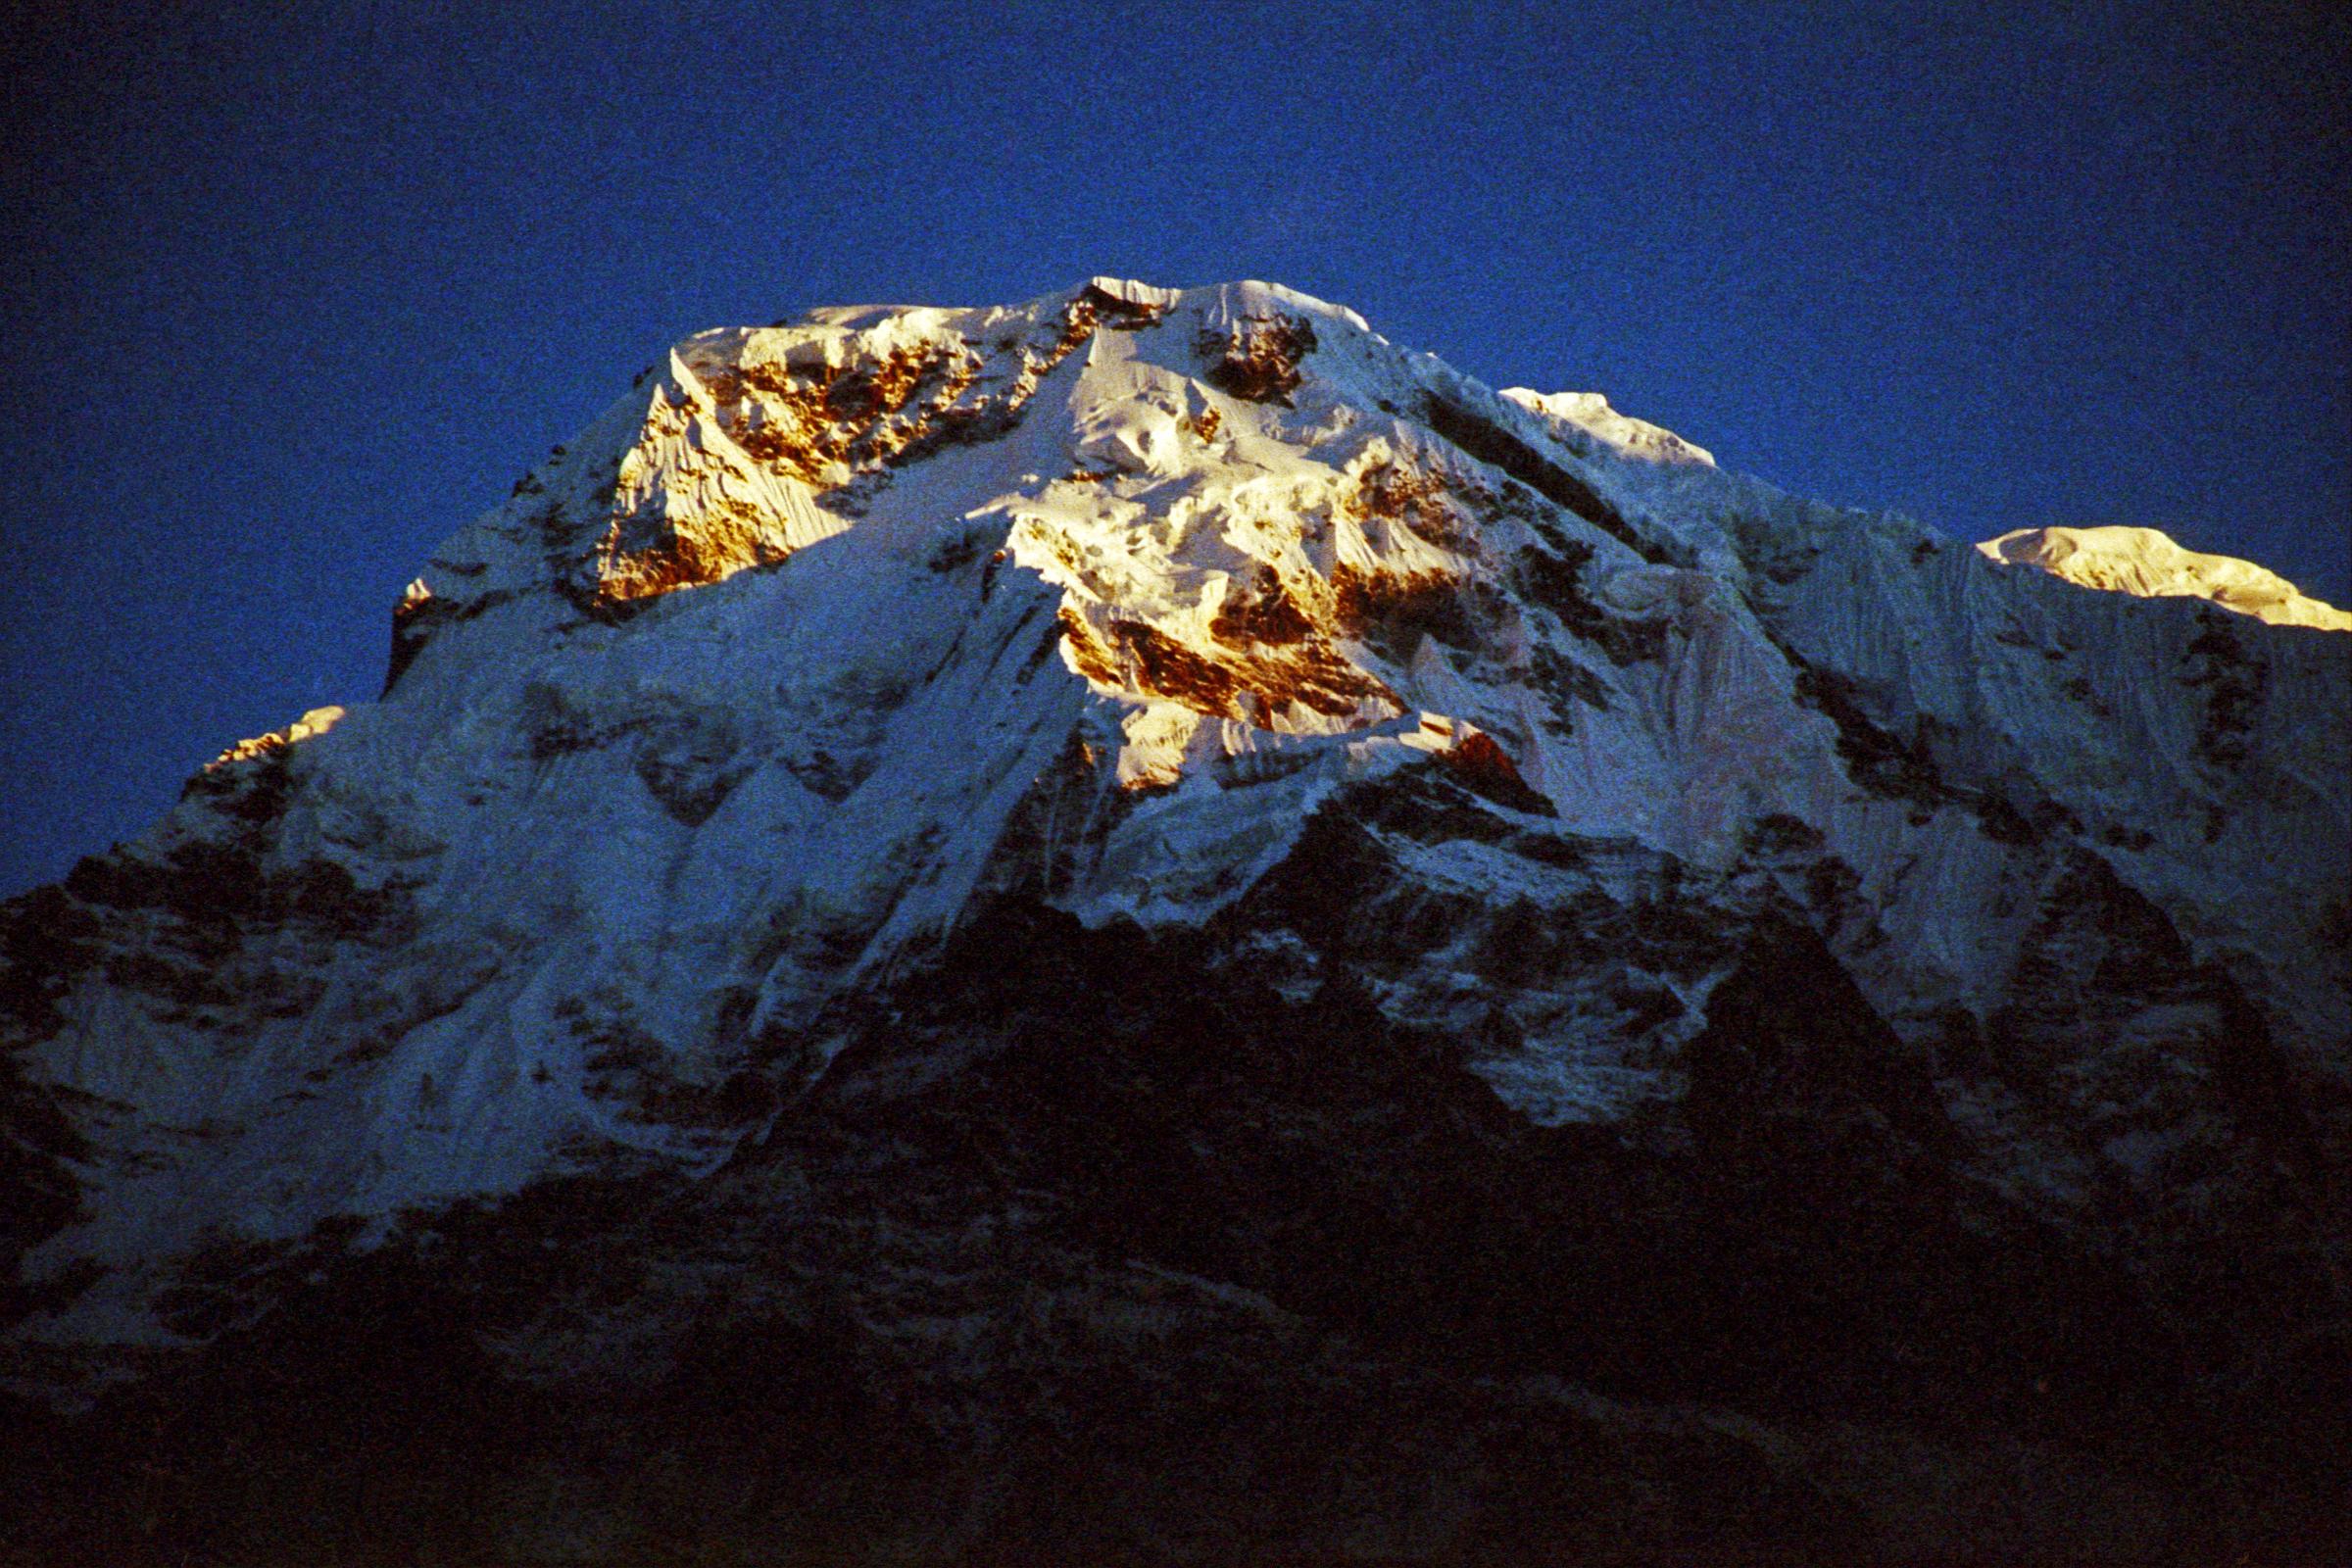 102 Annapurna South Sunrise From Chomrong The sun slowly started to rise, shining very brightly on Annapurna South, taken from Chomrong.